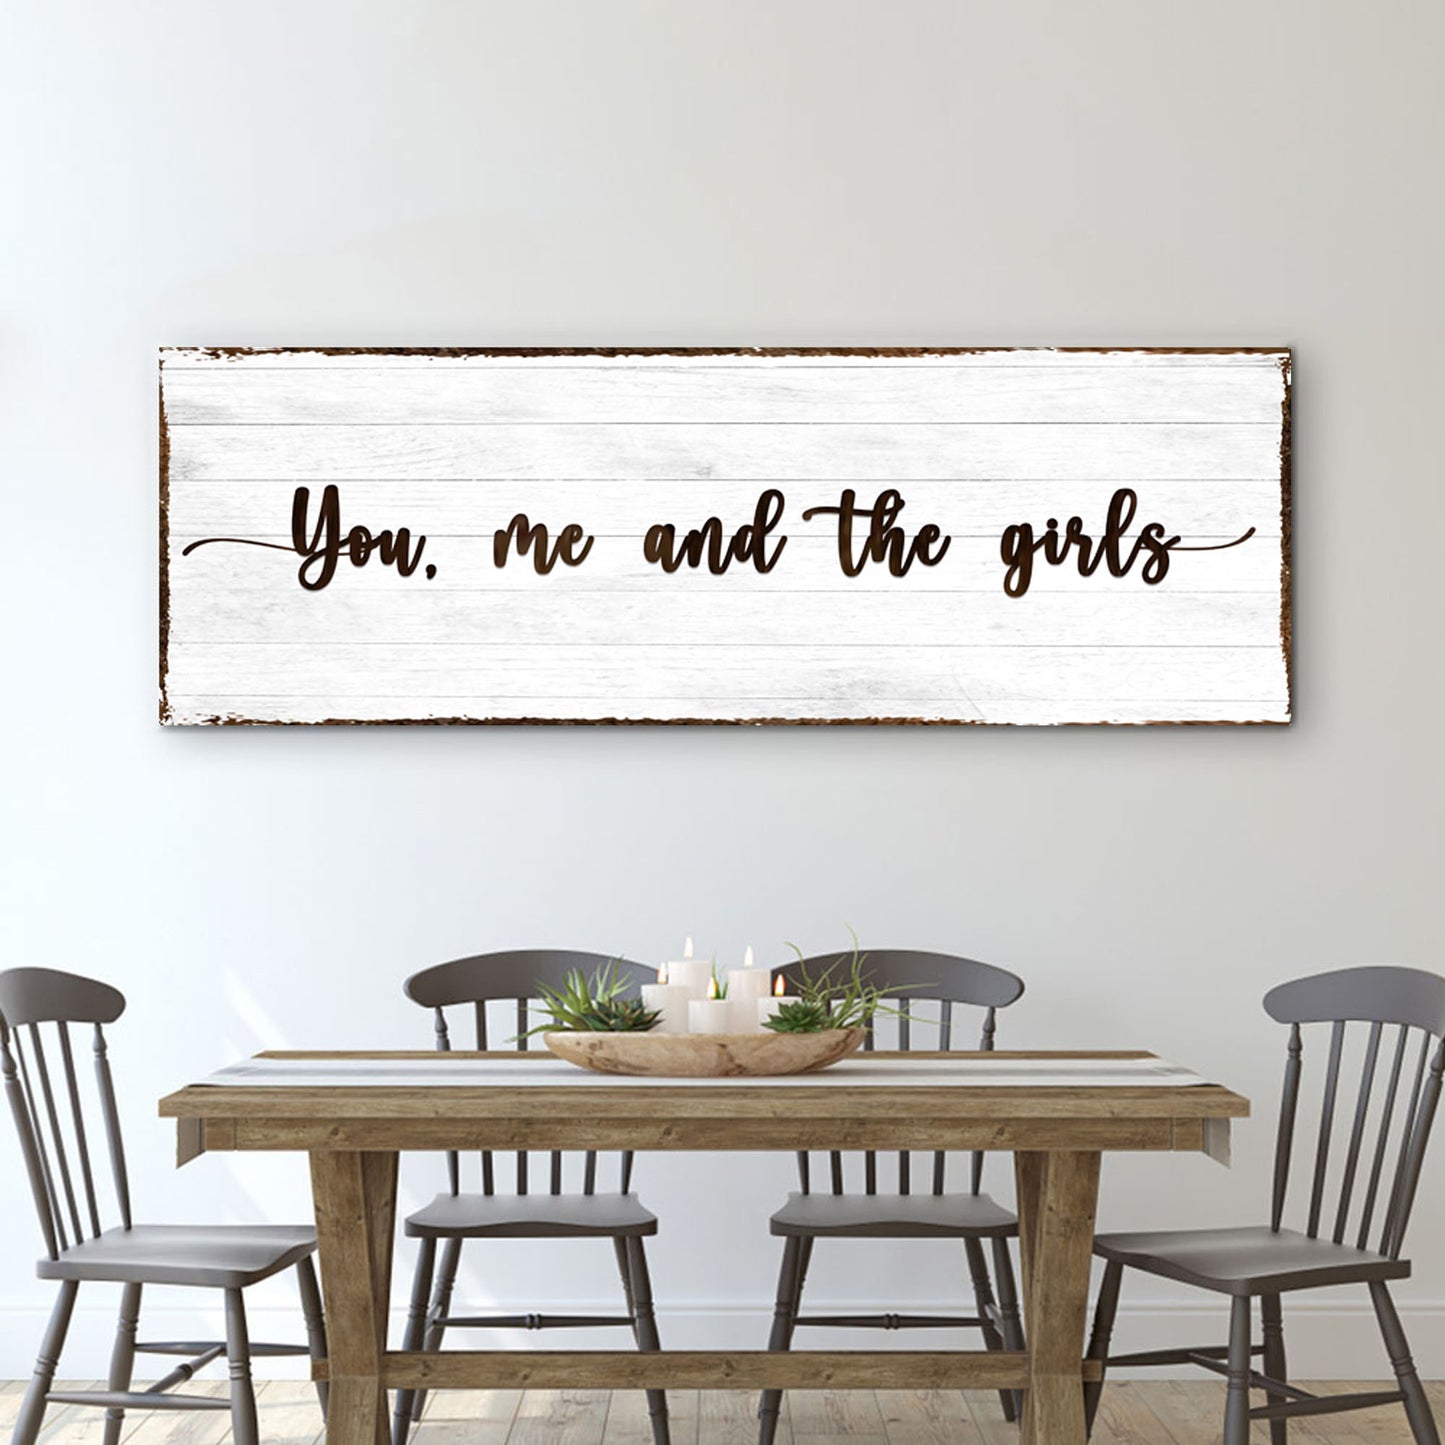 You, Me, and the Girls Sign - Image by Tailored Canvases